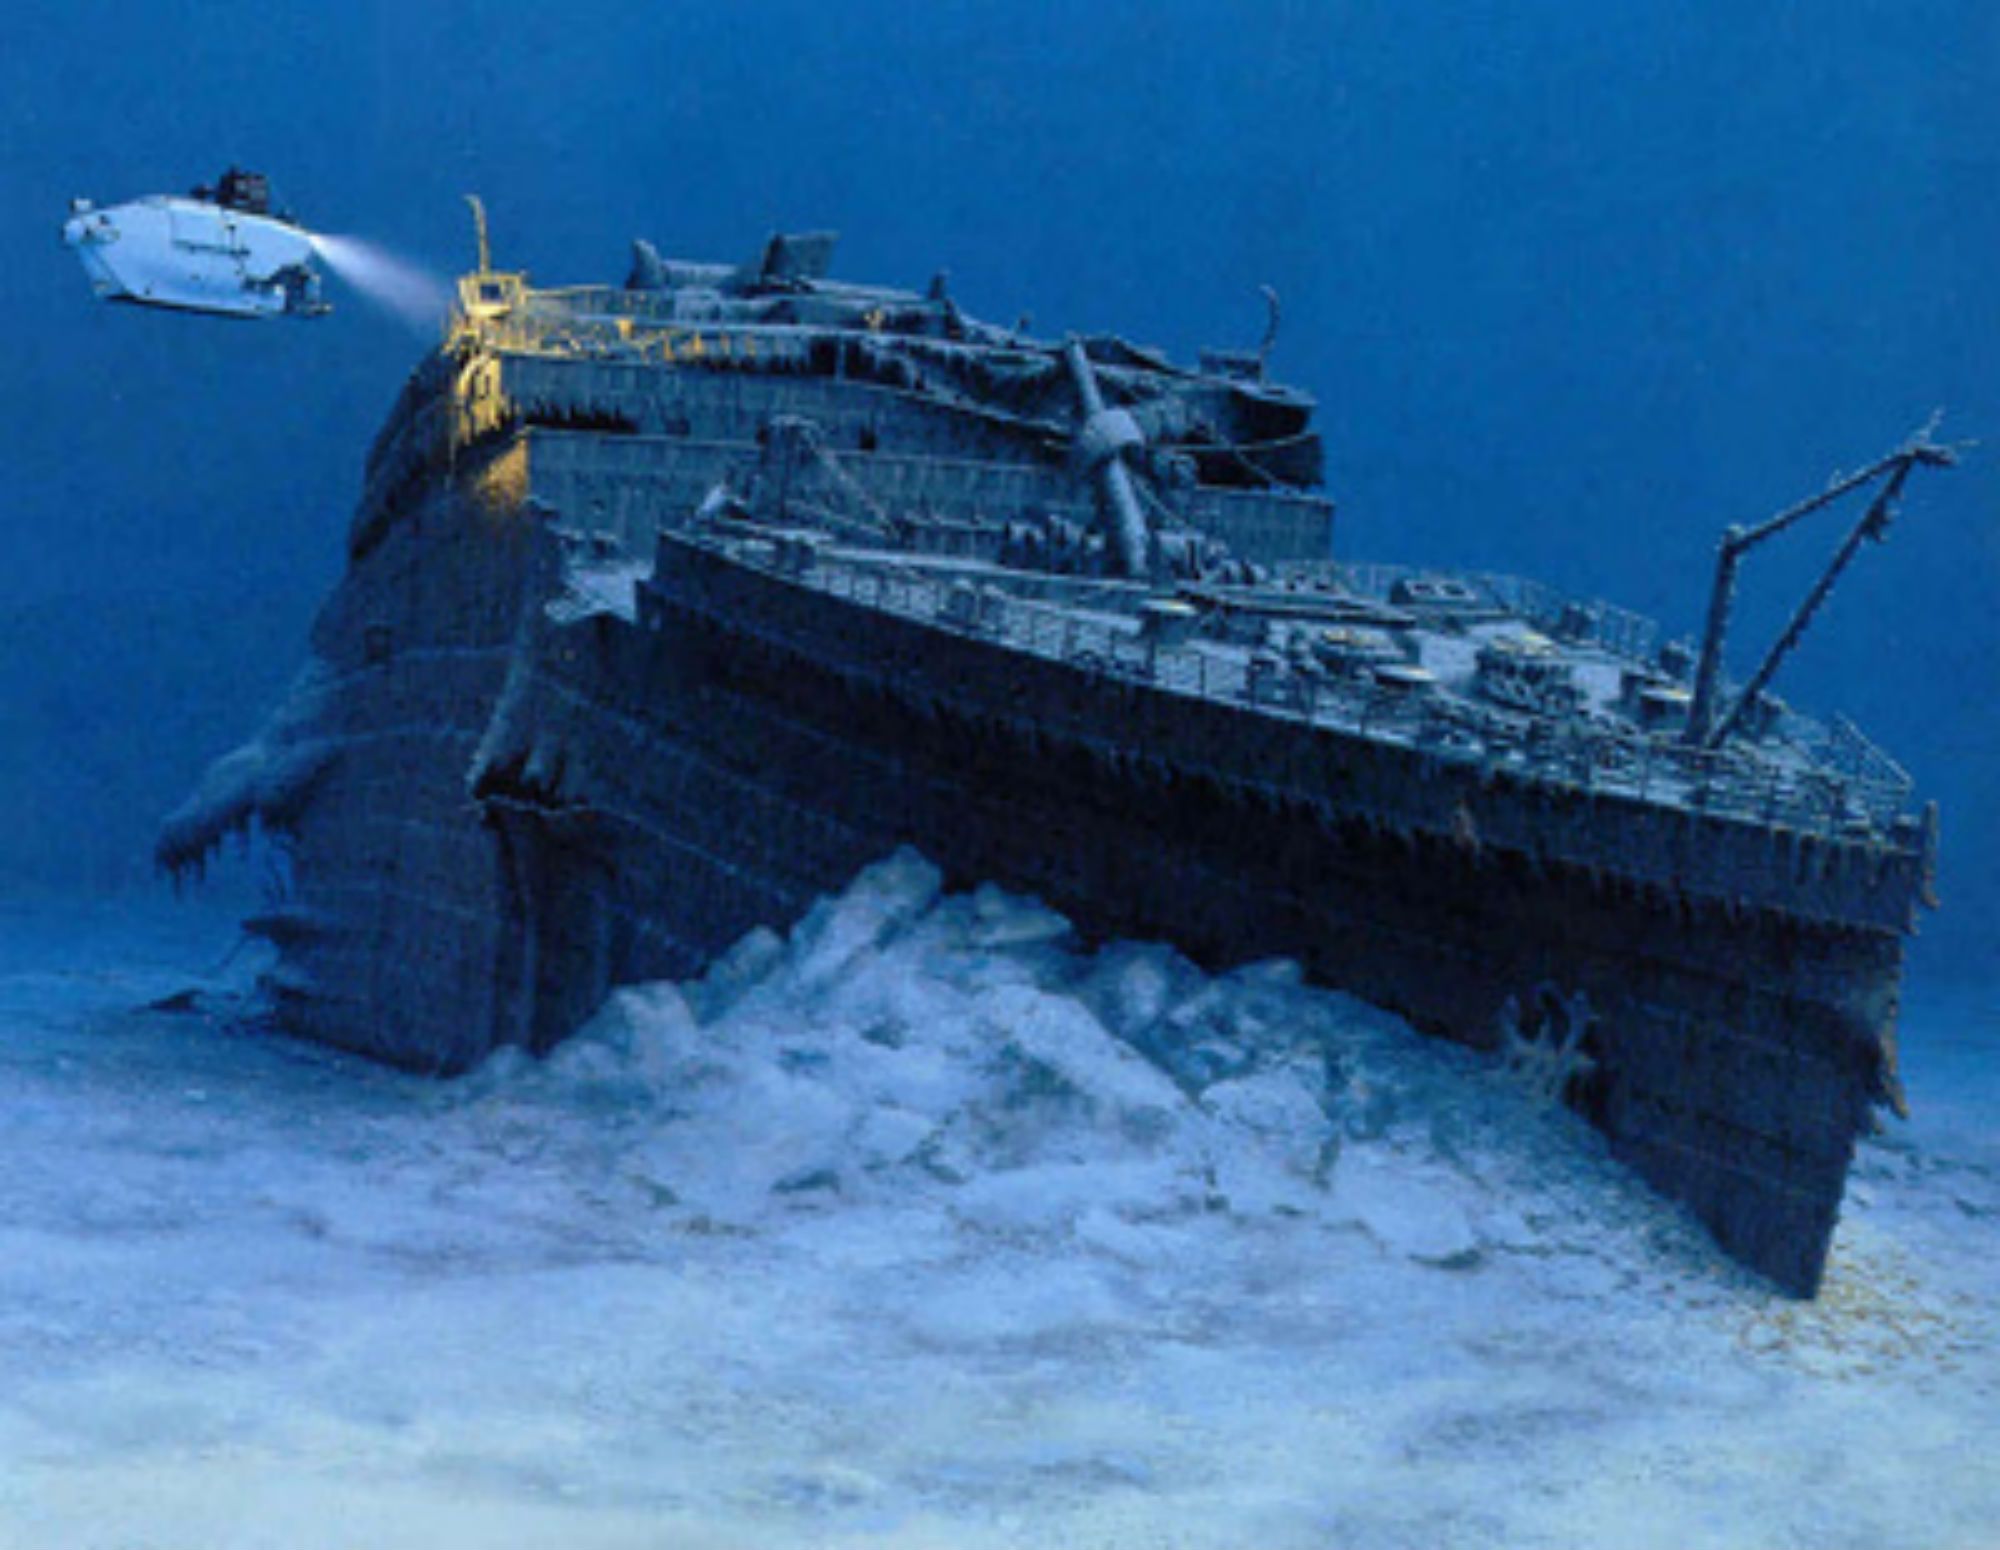 No one knew the exact location of the Titanic wreckage for 73 years